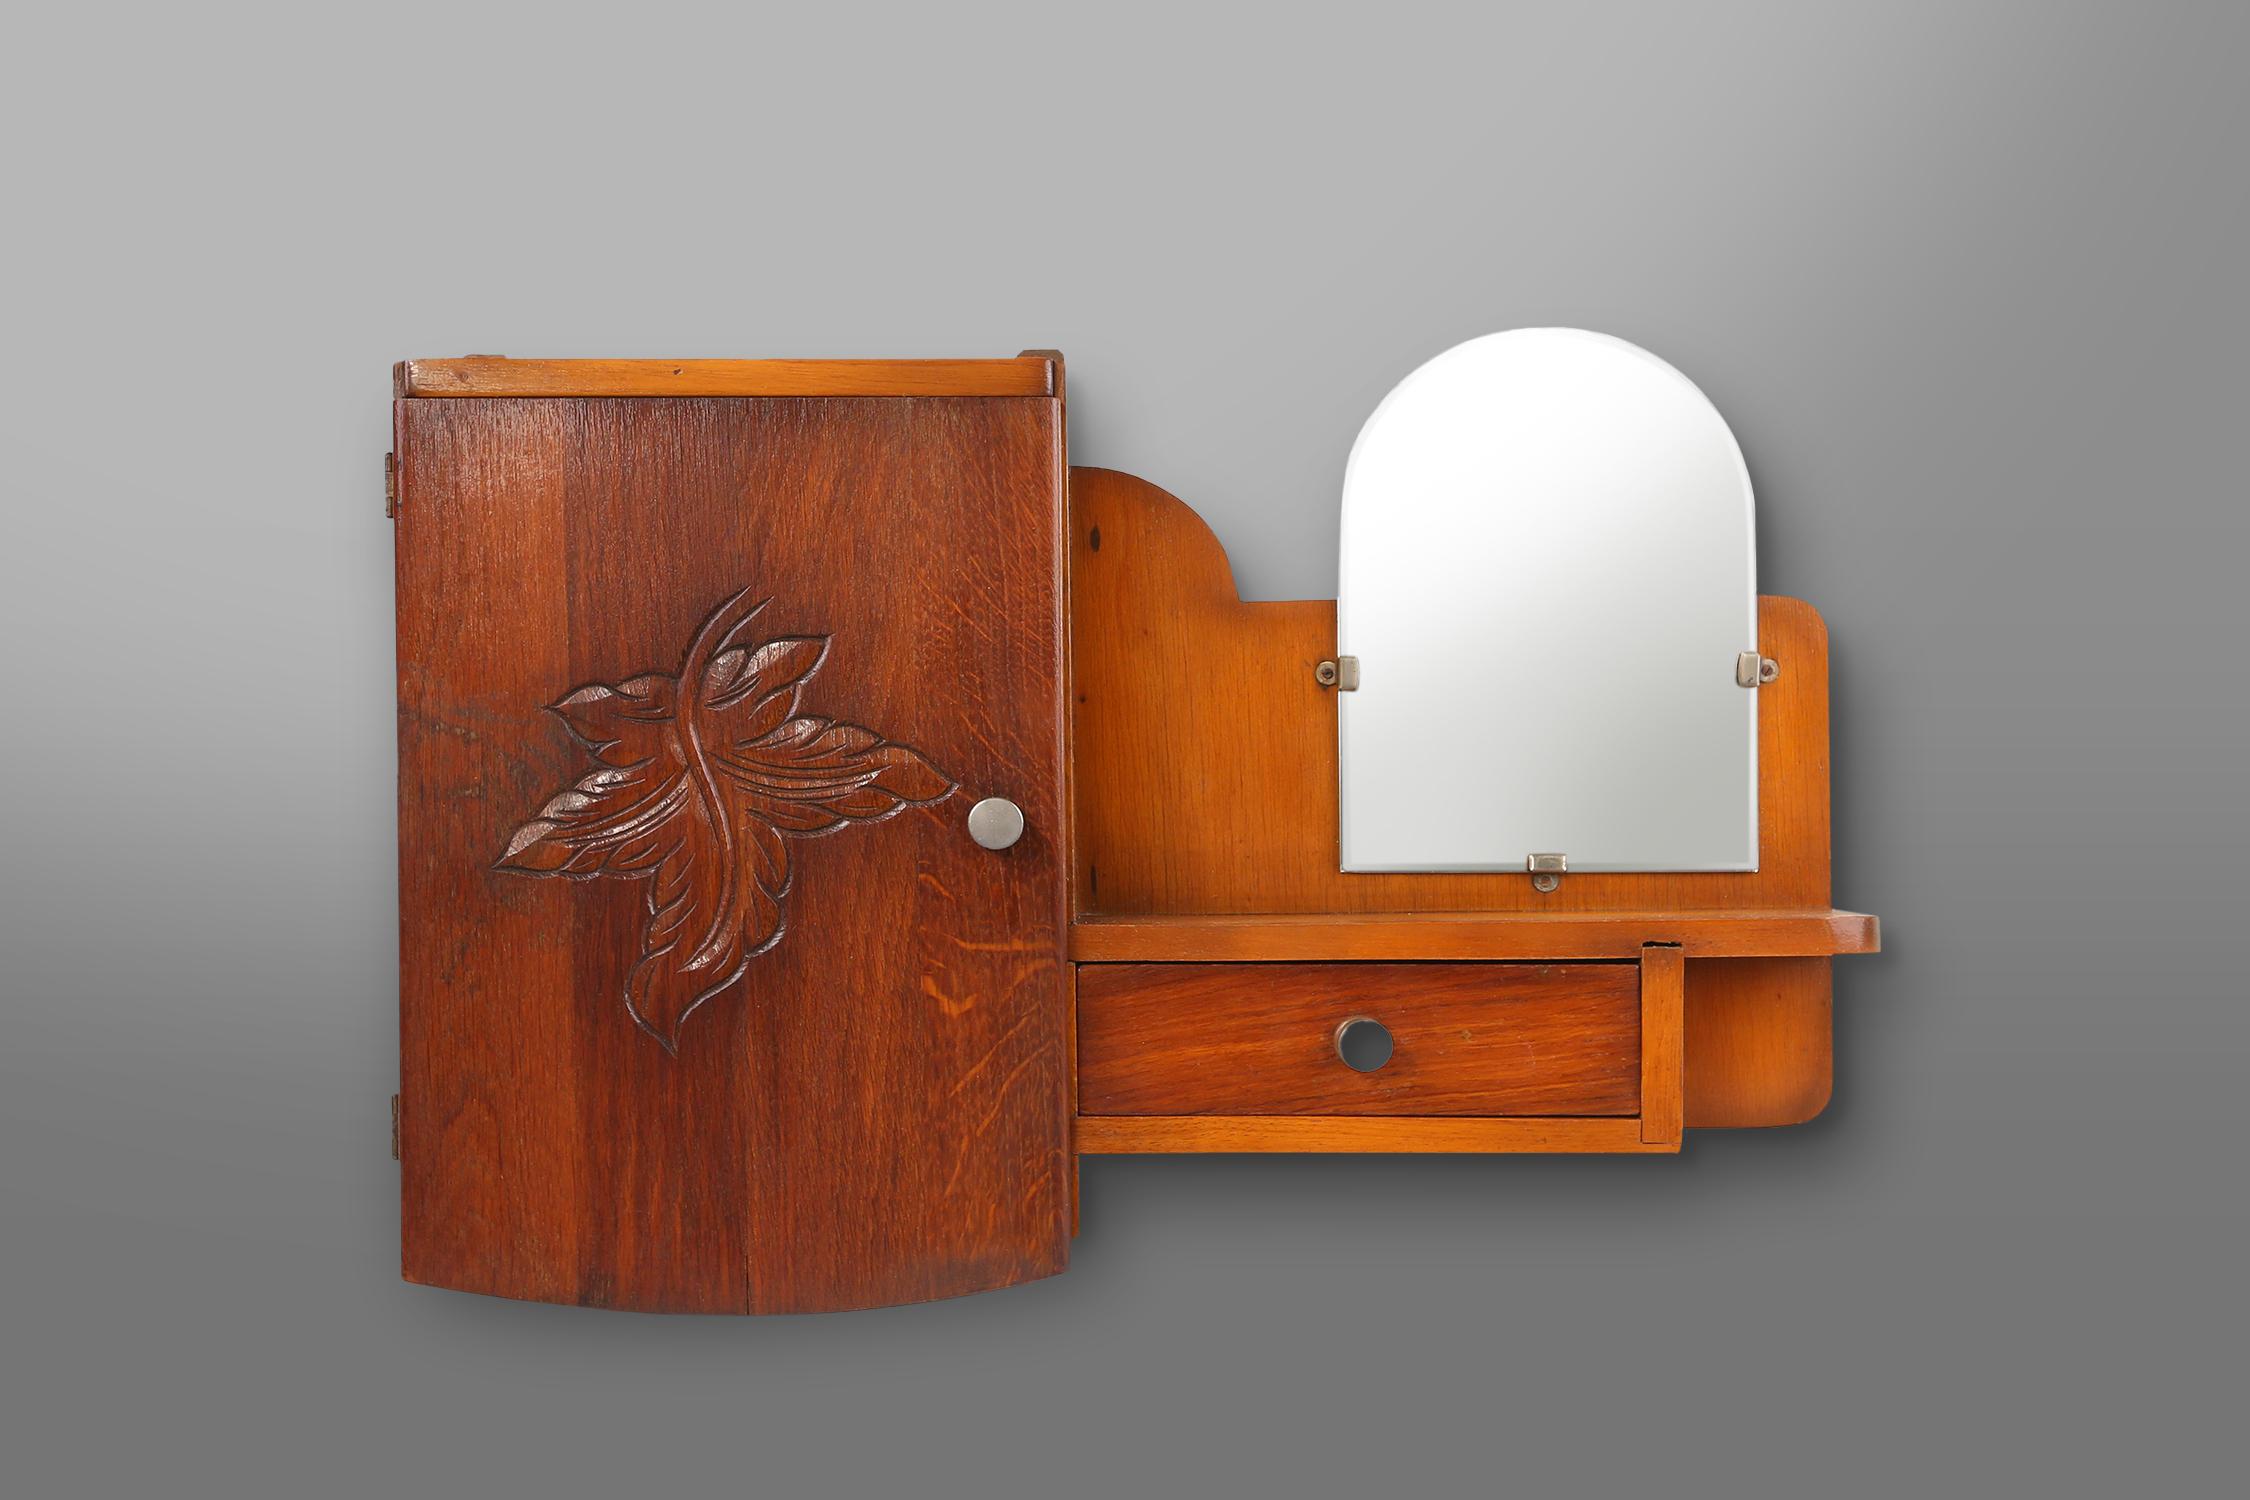 France / 1900 / shaving or medicine cabinet / wood with mirror / vintage / design

Beautiful shaving or medicine cabinet with special rounded door, made in France around 1900. Crafted in warm wood with round details and carvings on the door. This